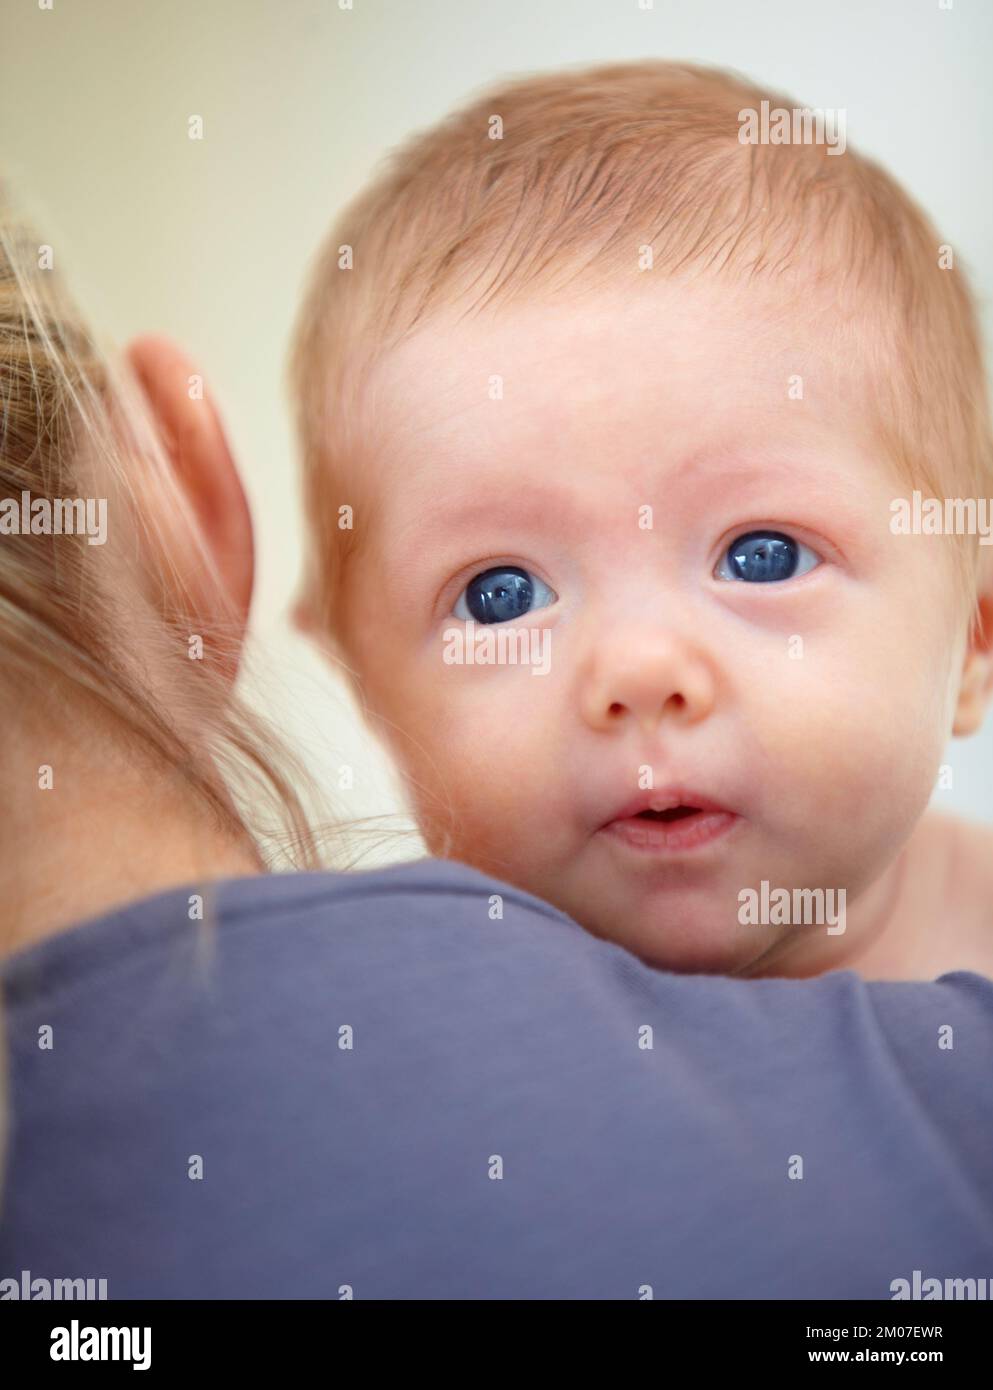 Enjoying the view...Closeup portrait of newborn baby being cradled on its moms shoulder. Stock Photo